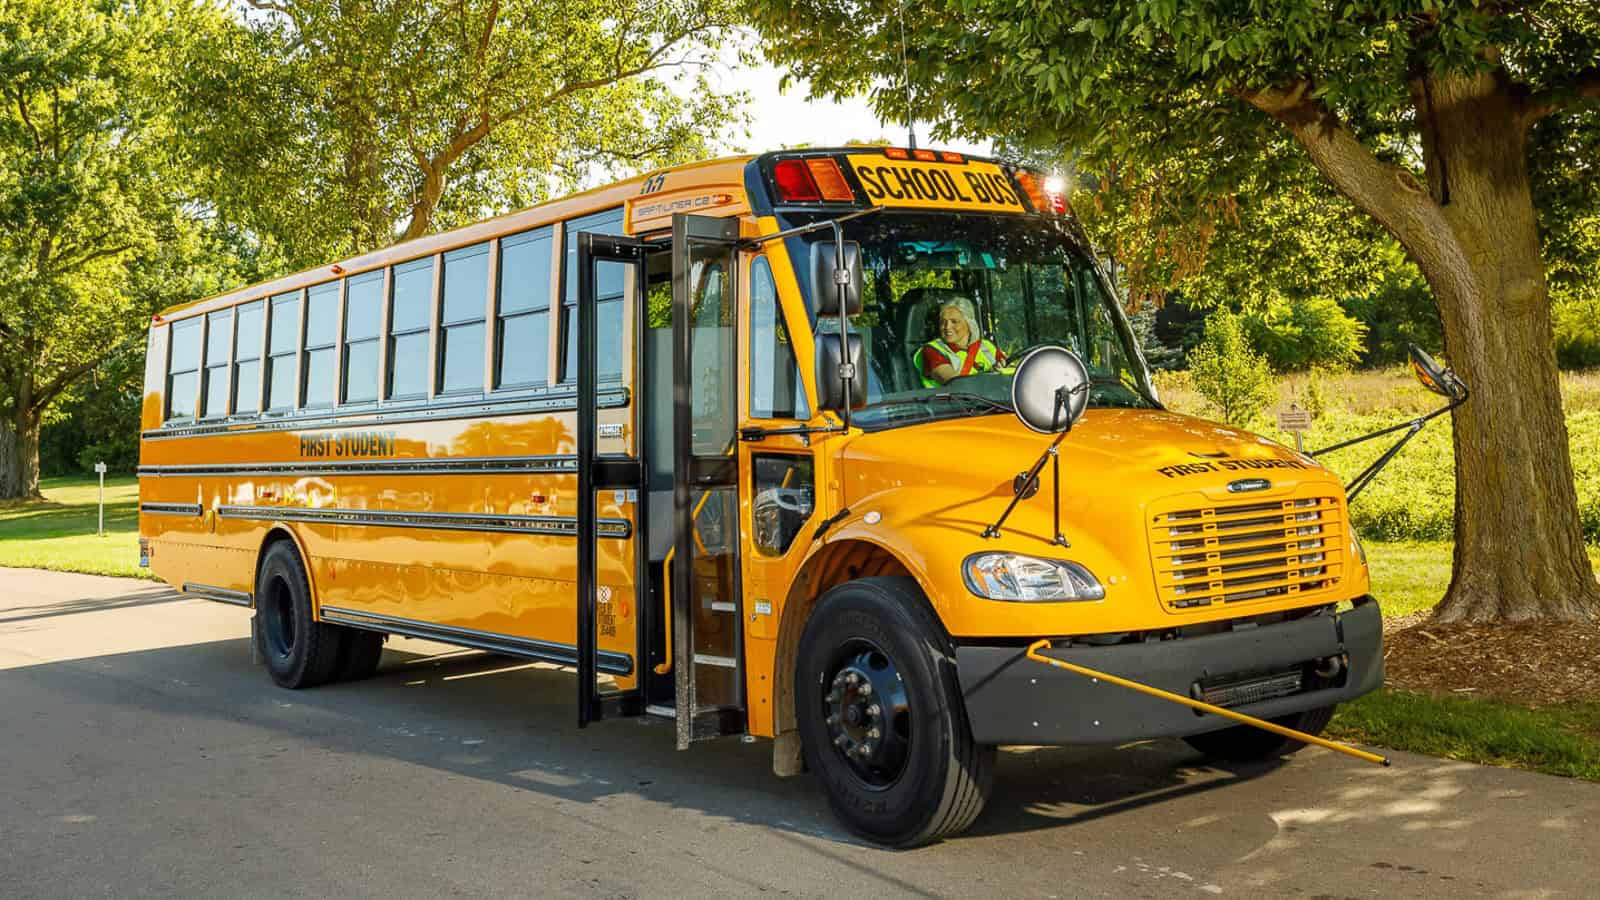 Steelton-Highspire School District Unveils Pennsylvania First Electric School Buses with First Student Partnership